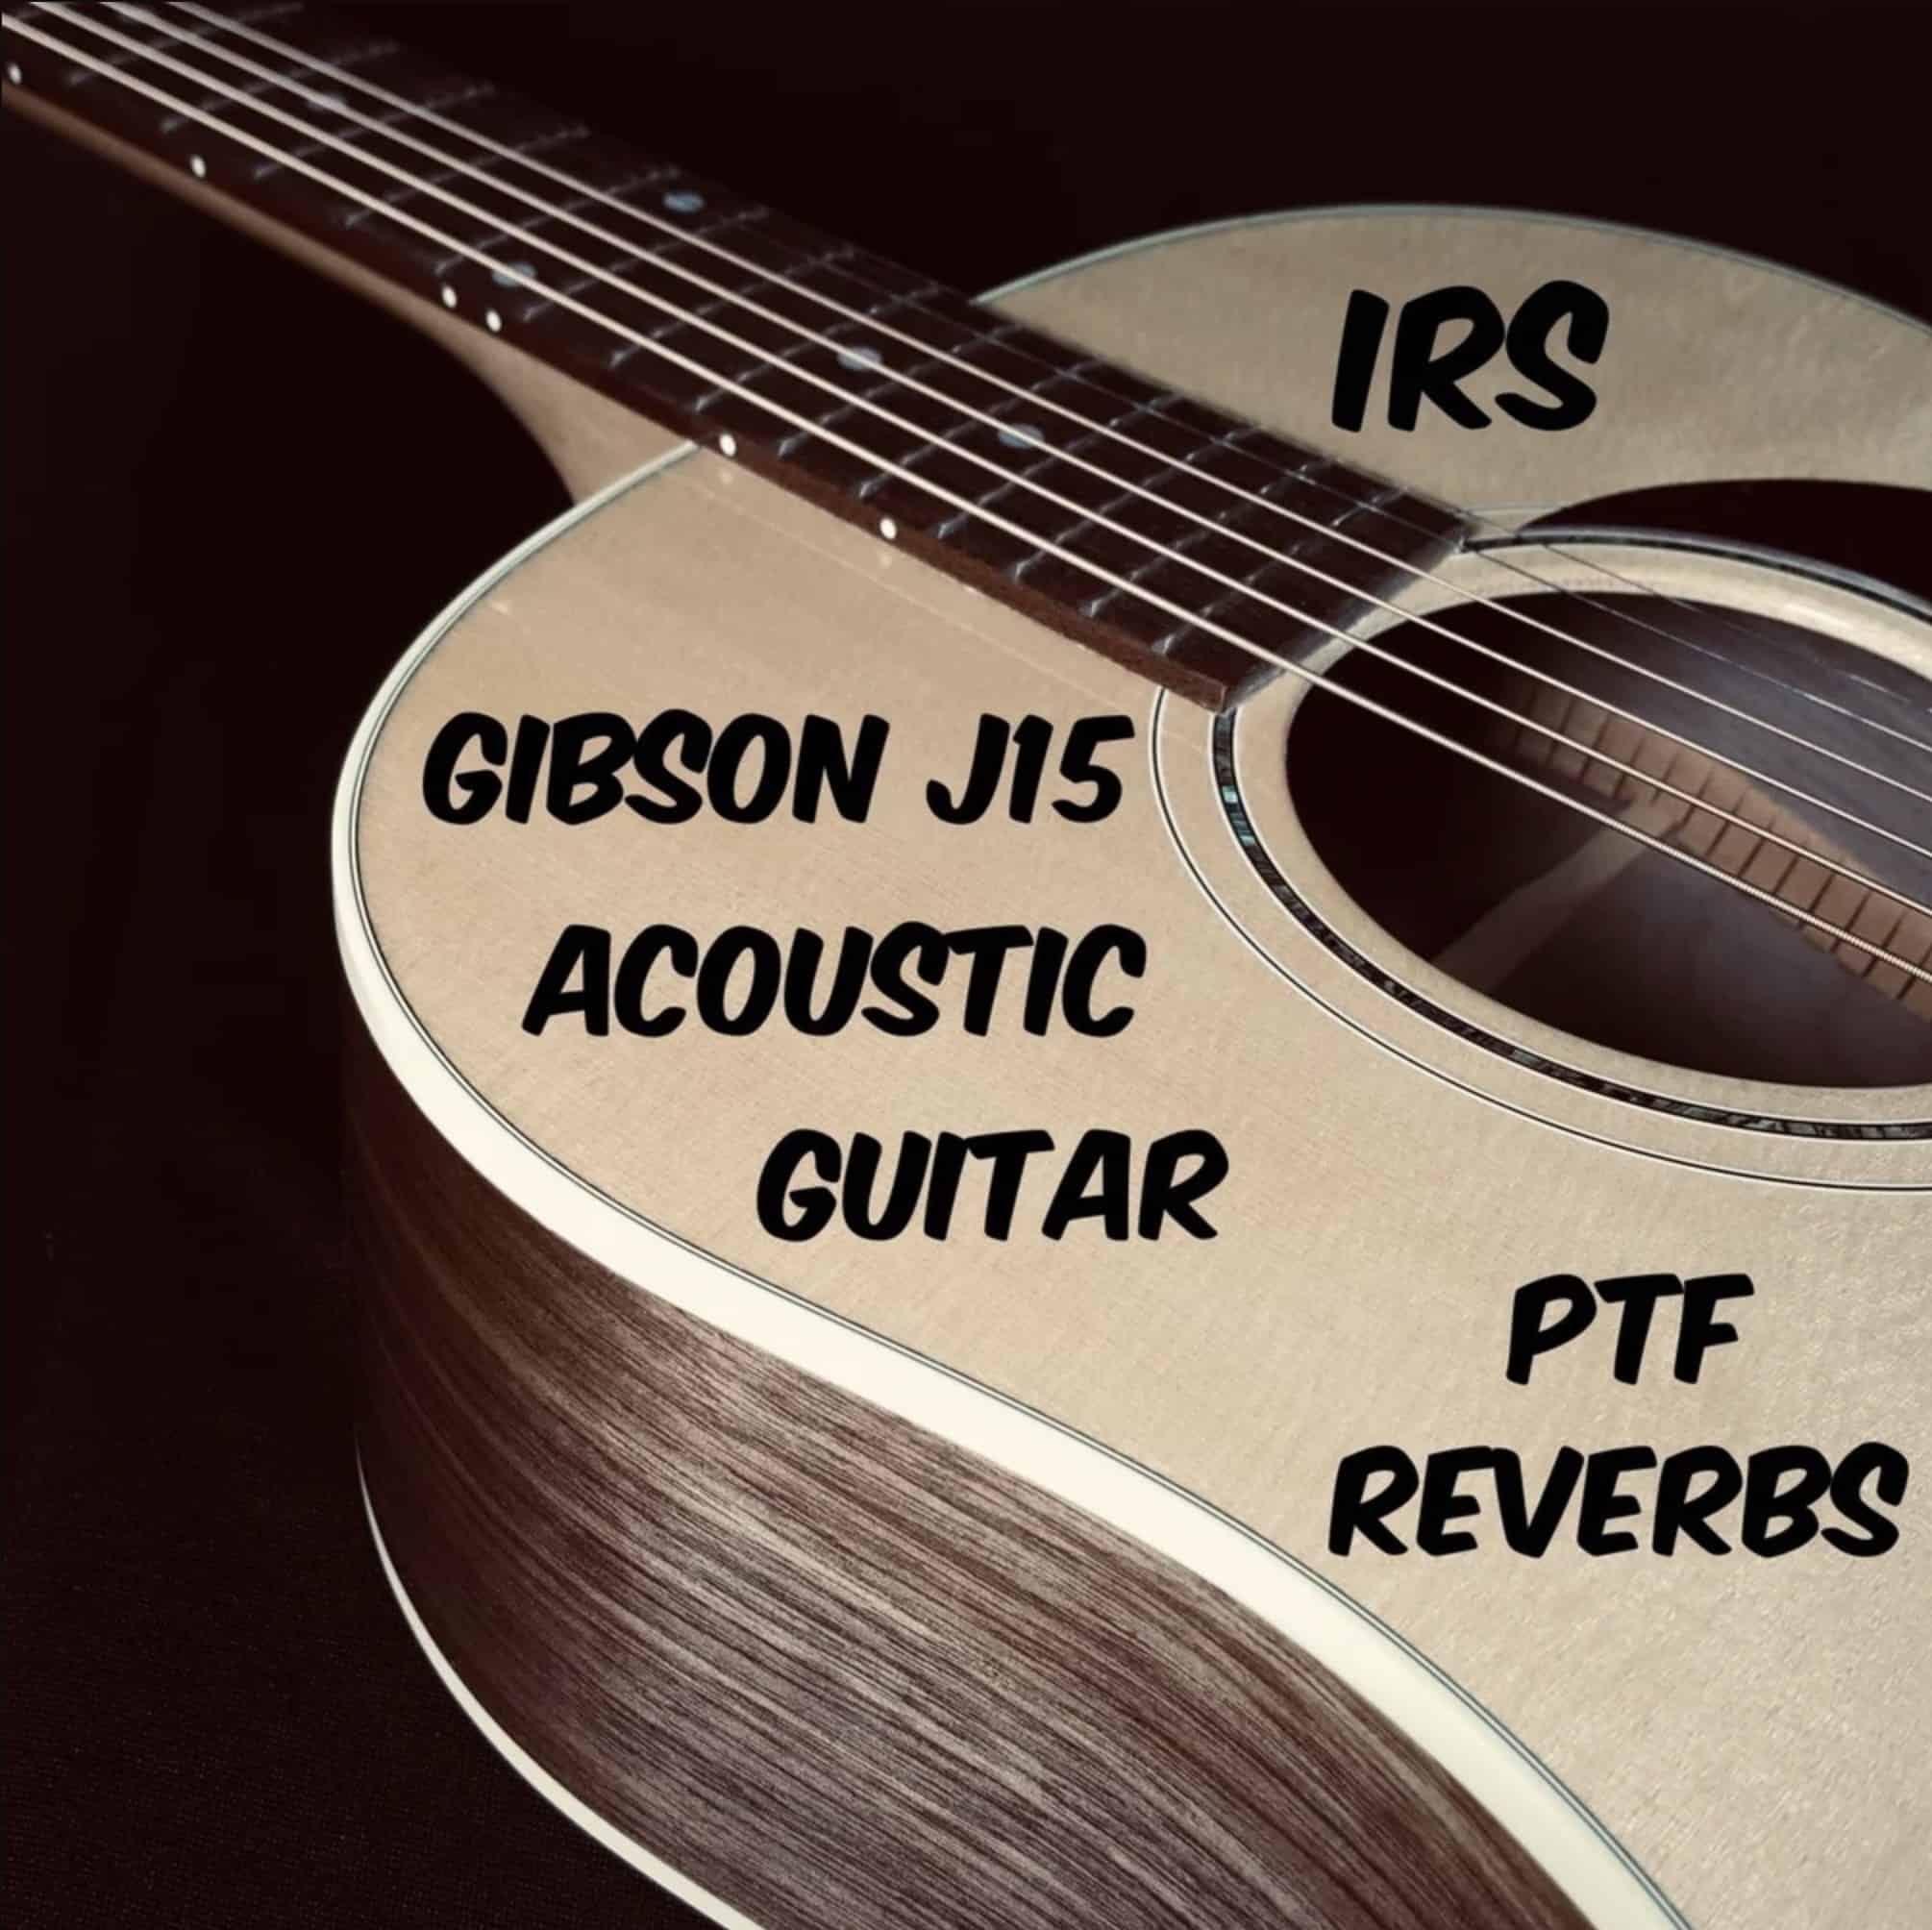 GIBSON J 15 ACOUSTIC GUITAR IRS By A Past to Future Release